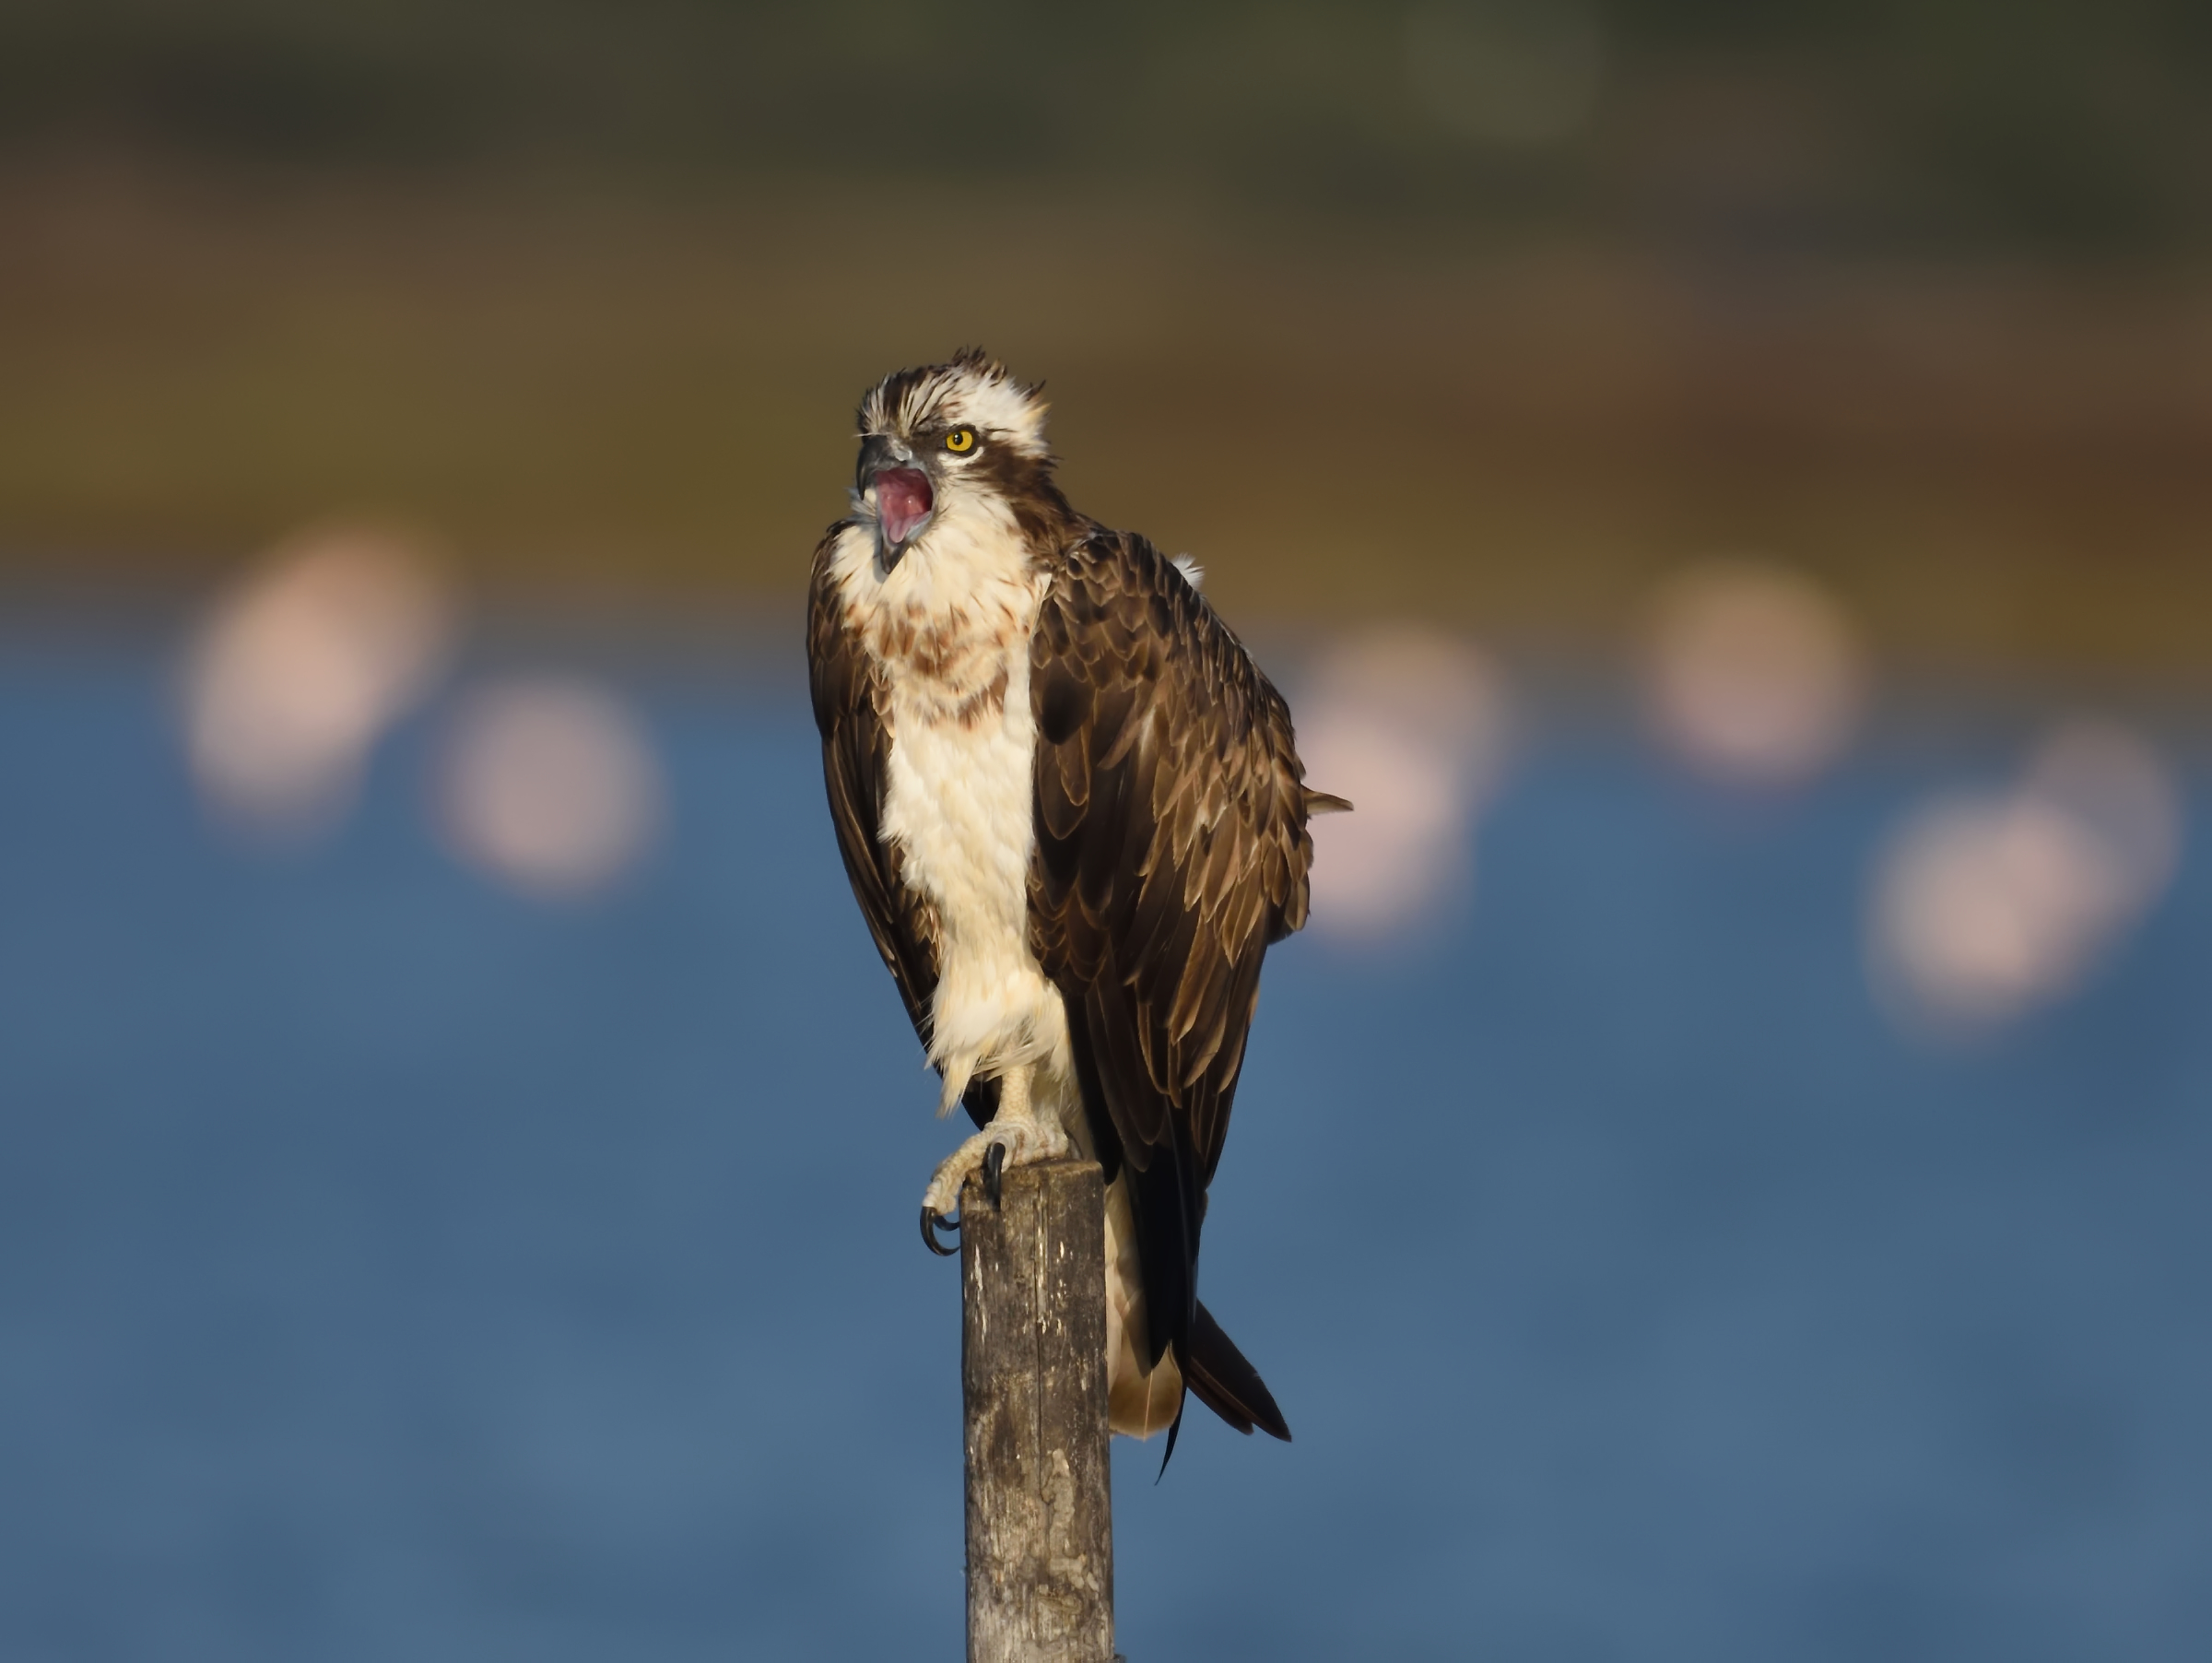 The "song" of the osprey...